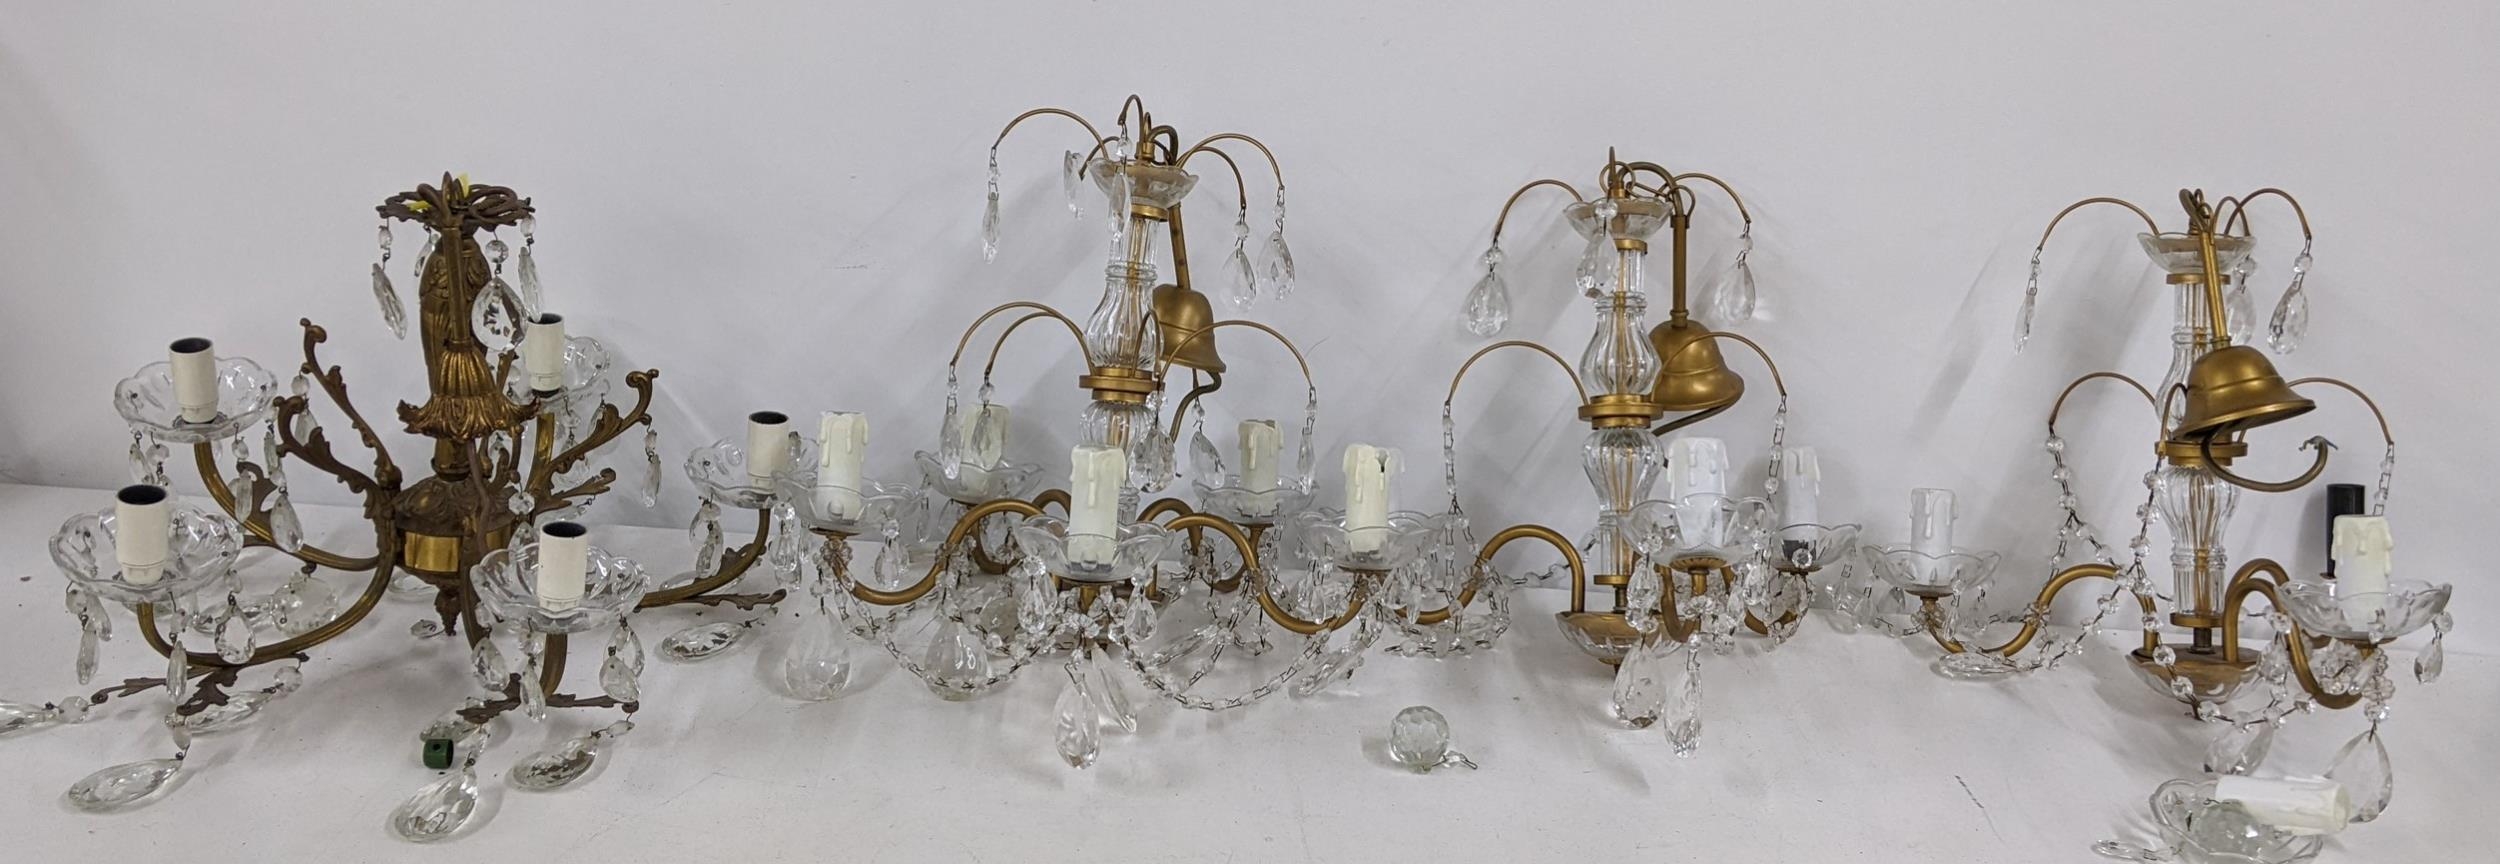 Four mid 20th century gilt metal hanging crystal drop chandeliers Location: If there is no condition